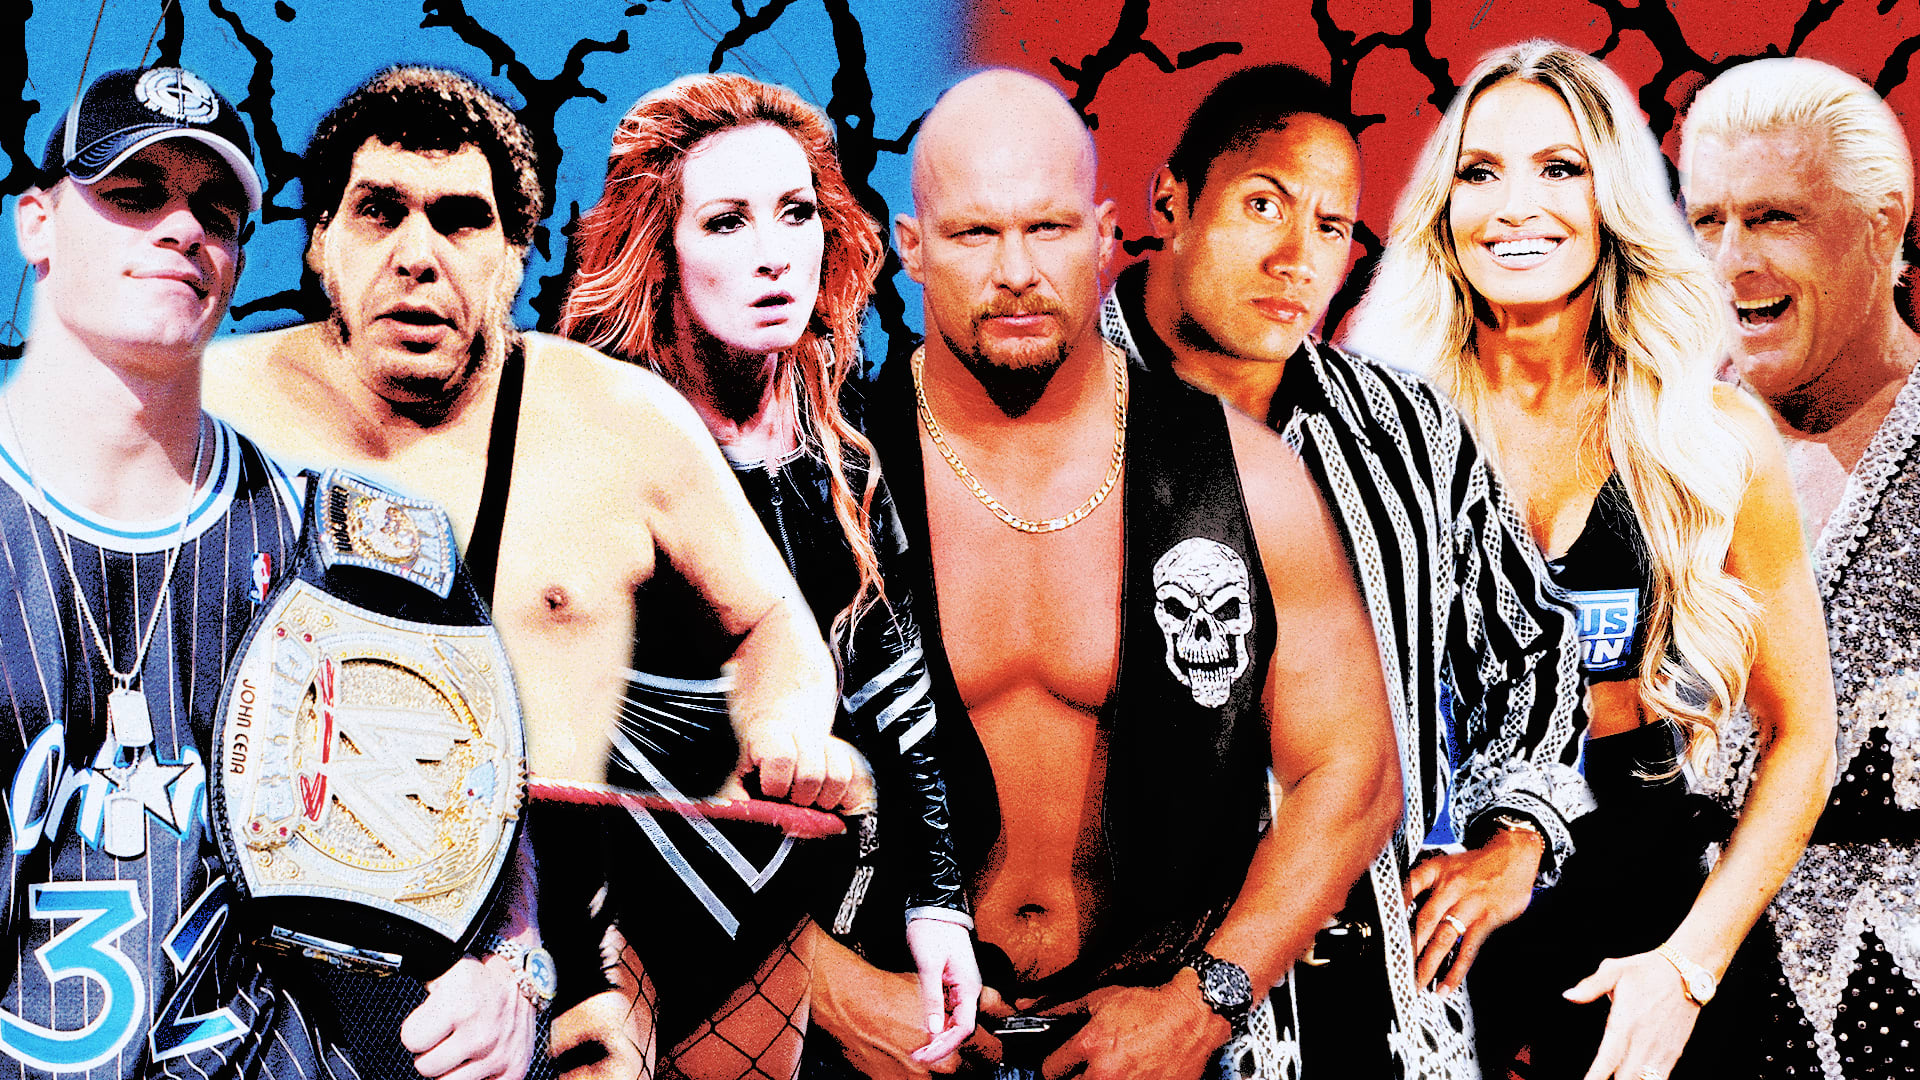 Various popular wrestlers like John Cena, Stone Cold Steve Austin, and The Rock pose next to each other against a cracked blue-and-red background.